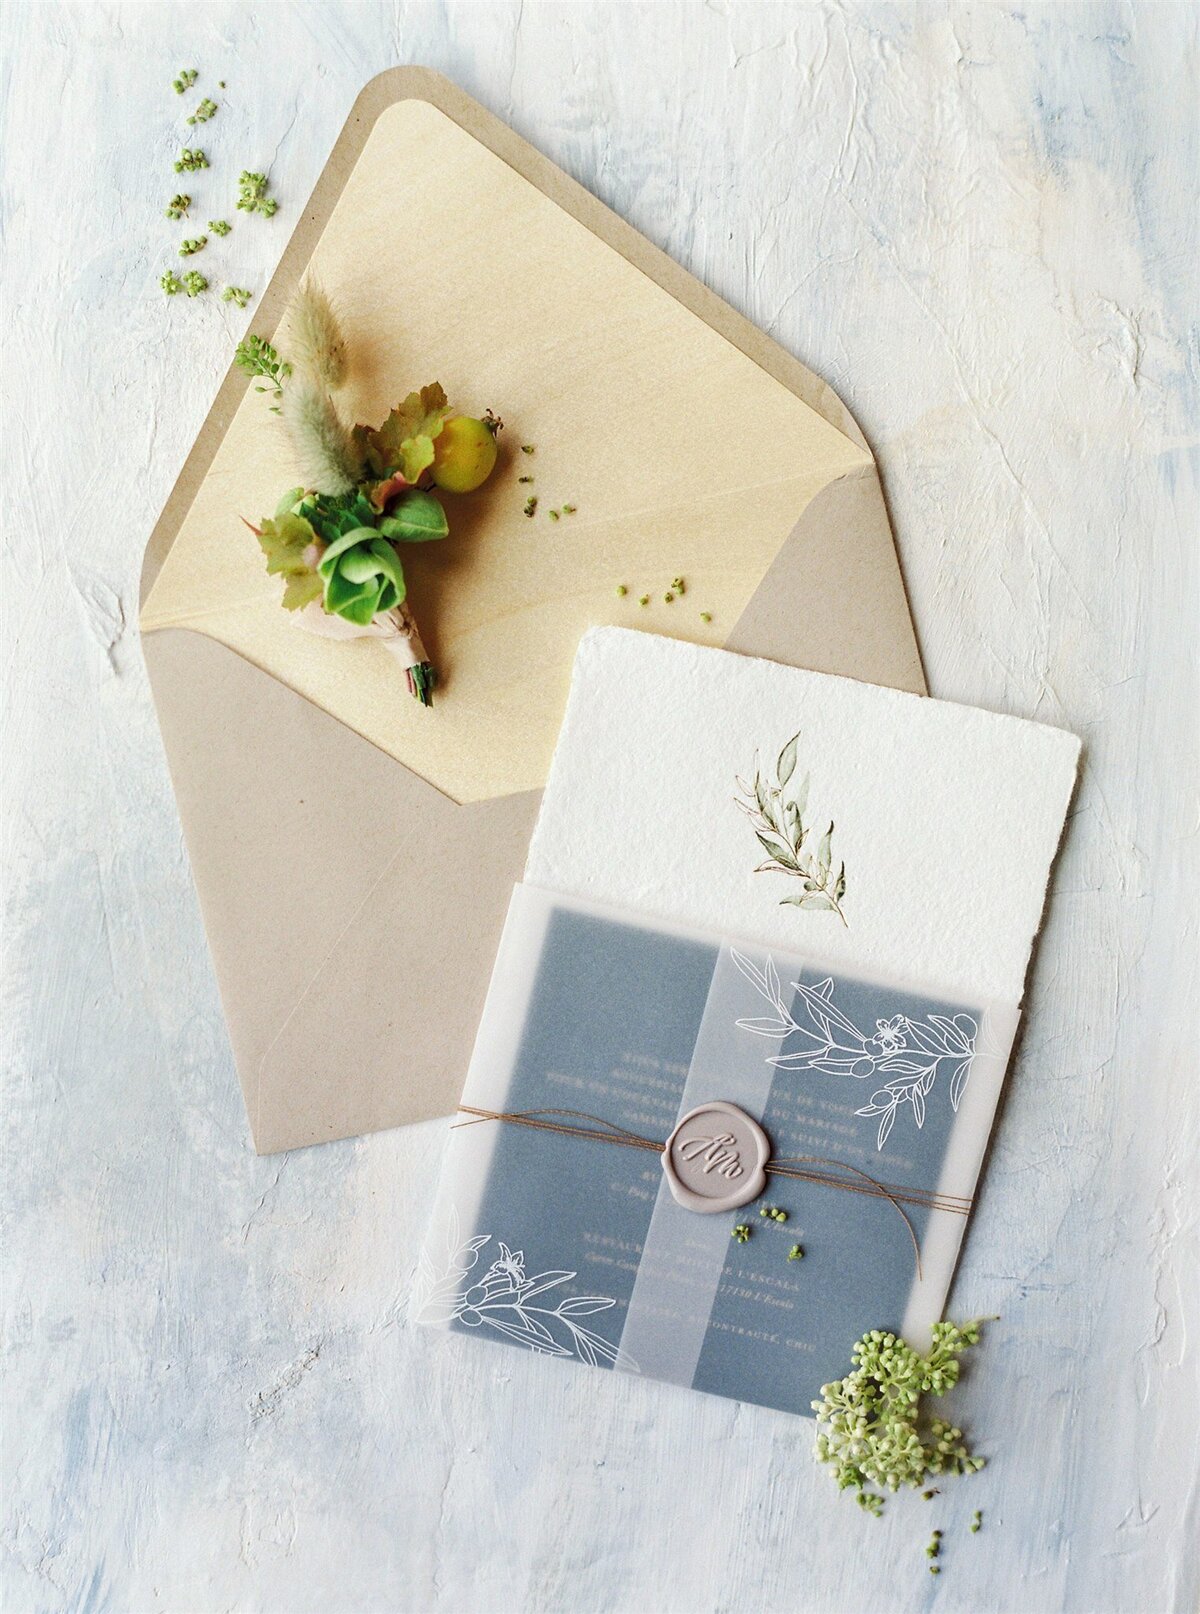 Nature inspired paper goods